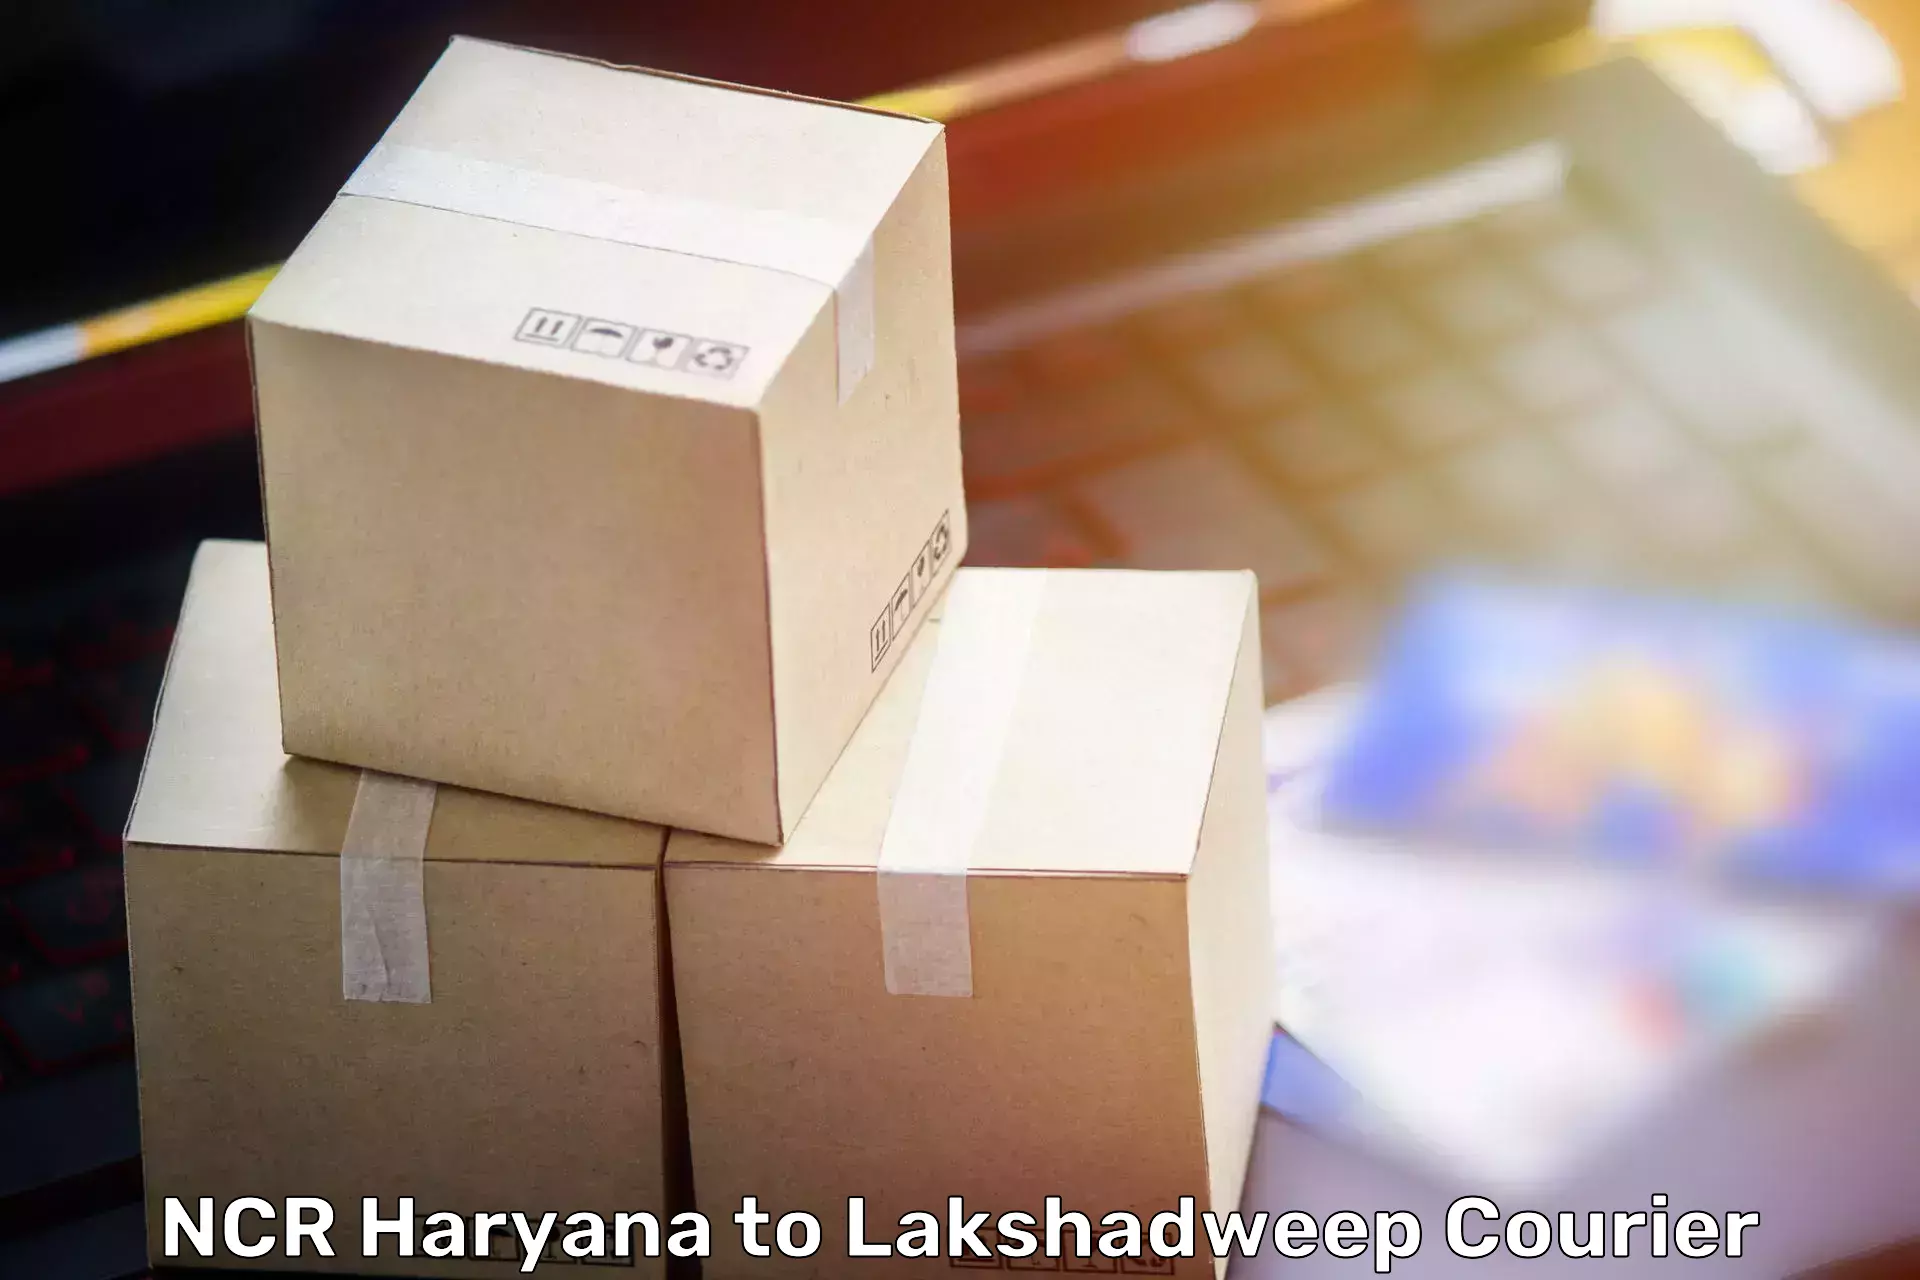 Professional moving assistance NCR Haryana to Lakshadweep